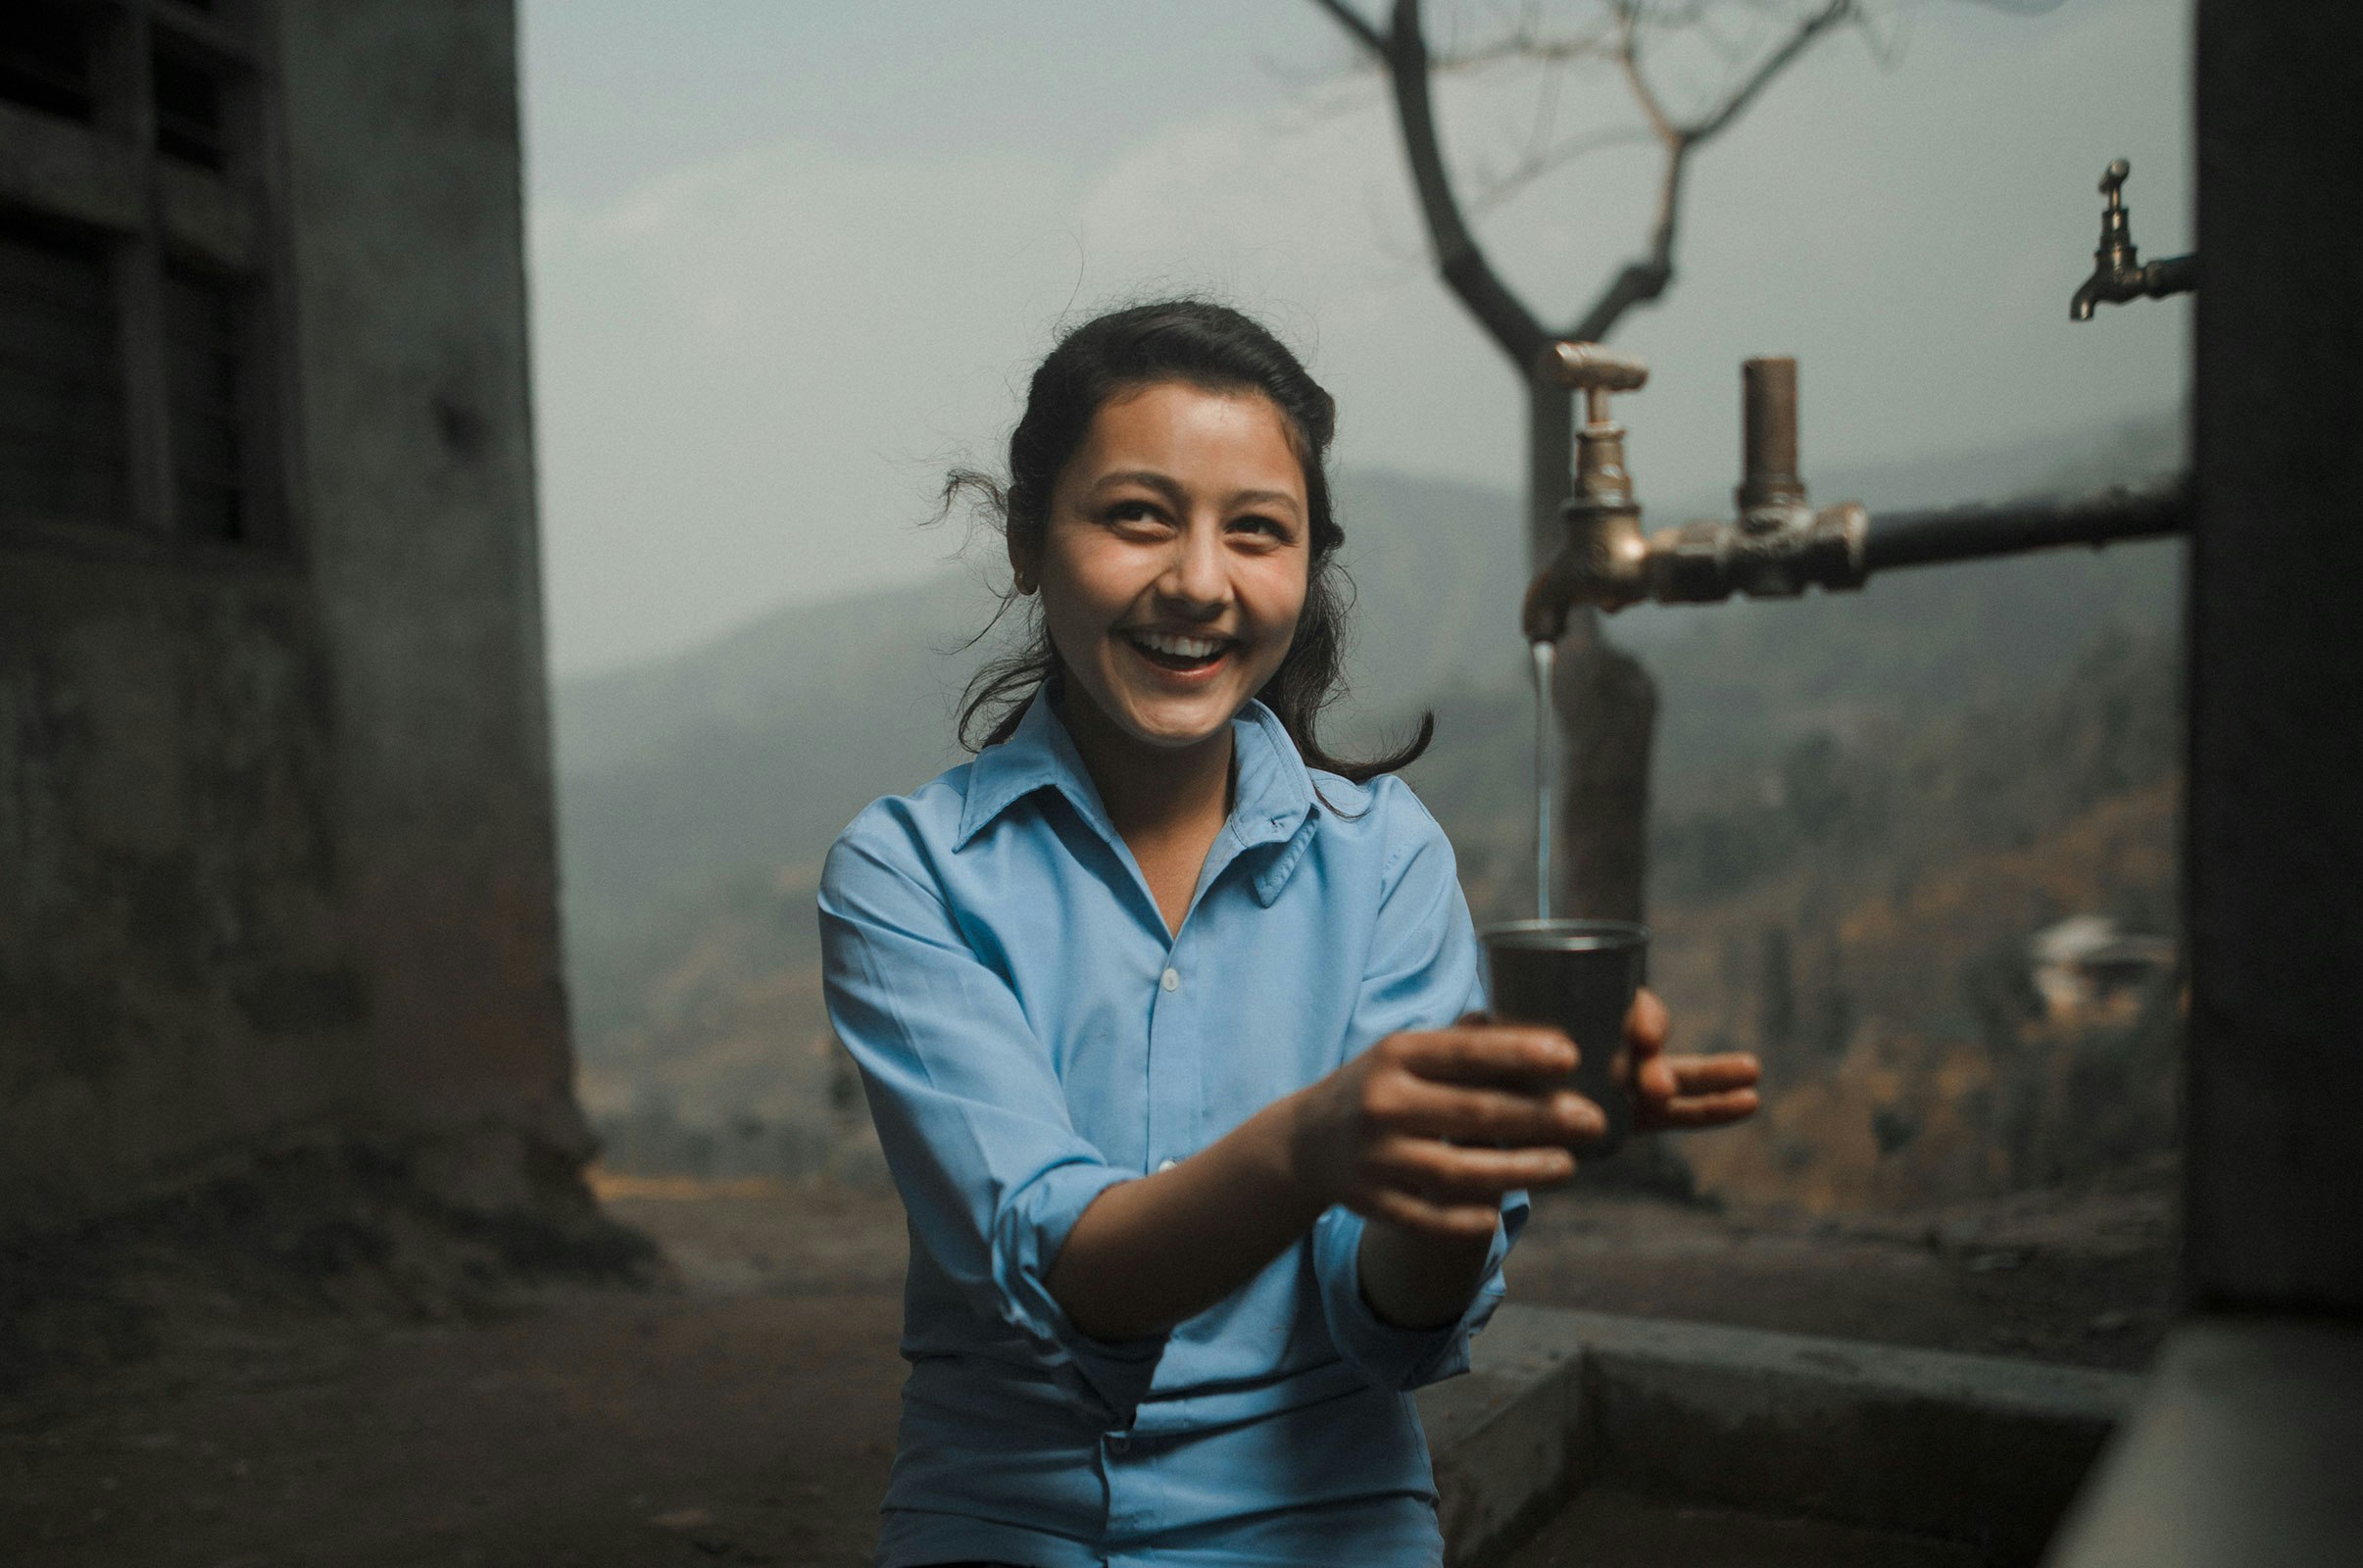 www.charitywater.org